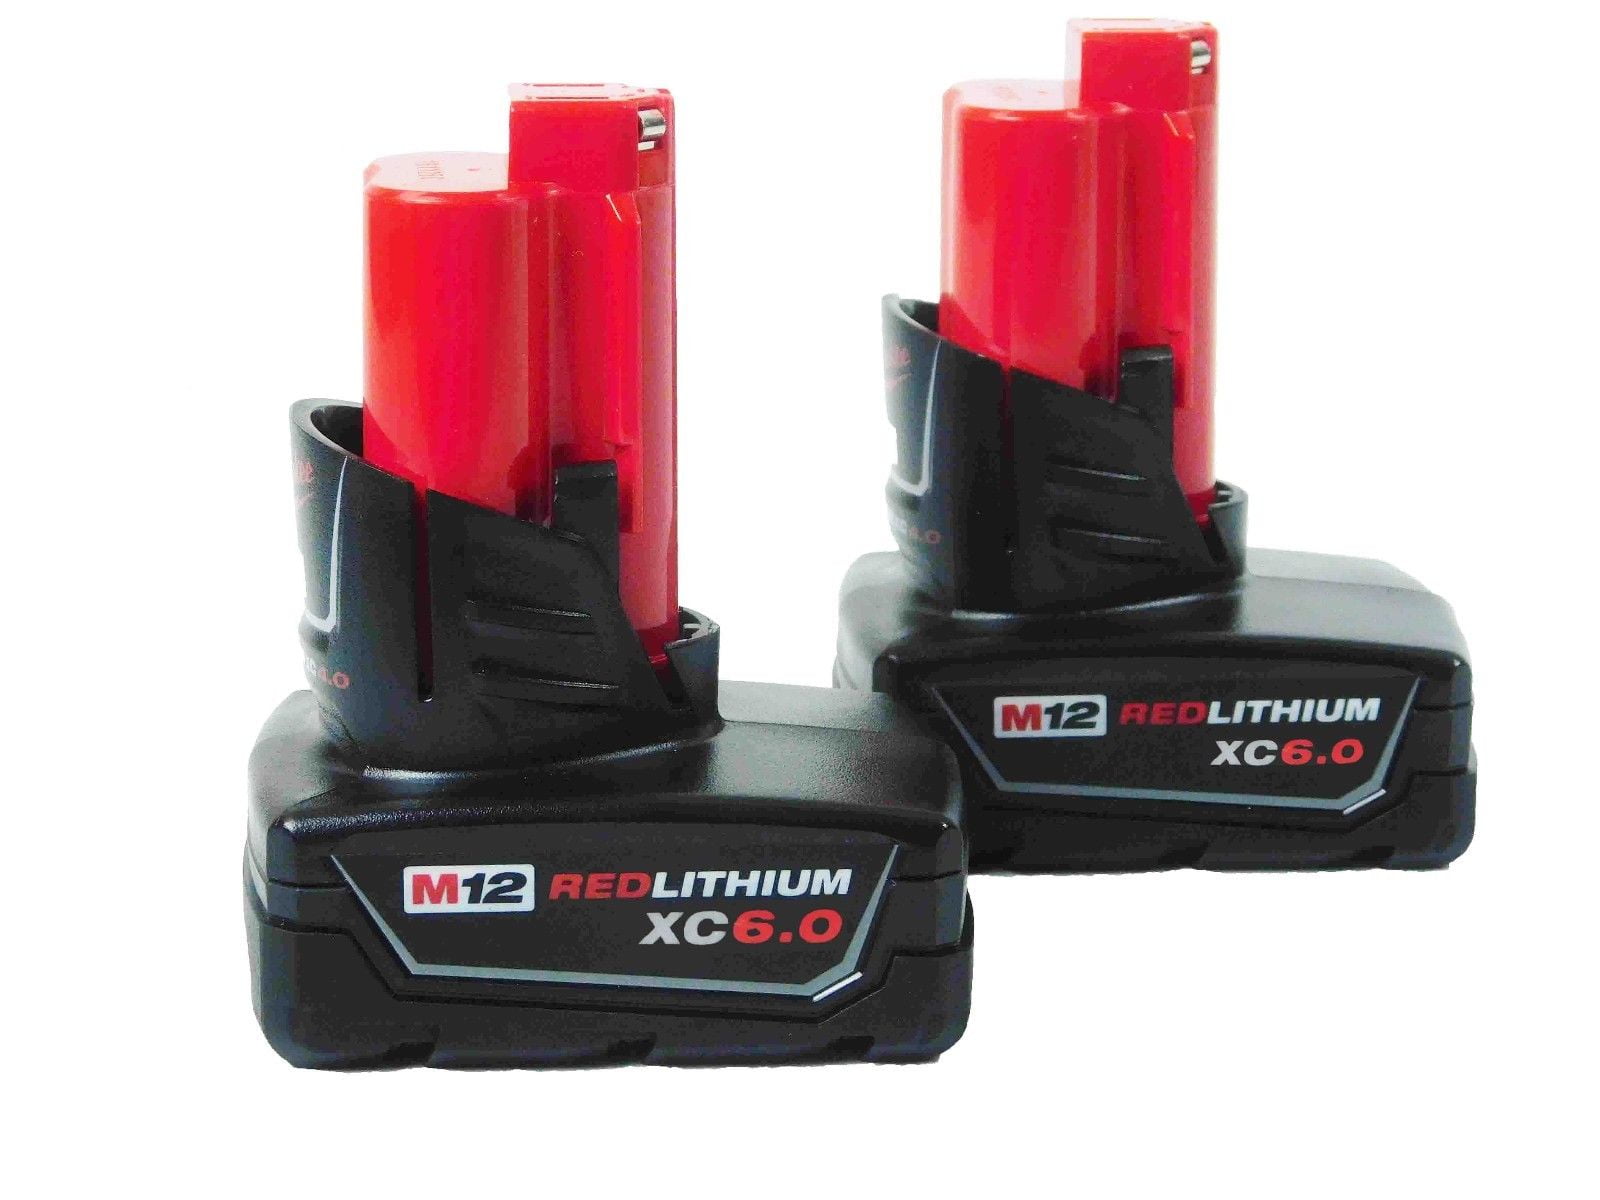 2X Extended Capacity Battery For Milwaukee M12 12 Volt XC 5.0 48-11-2460 C12 B 